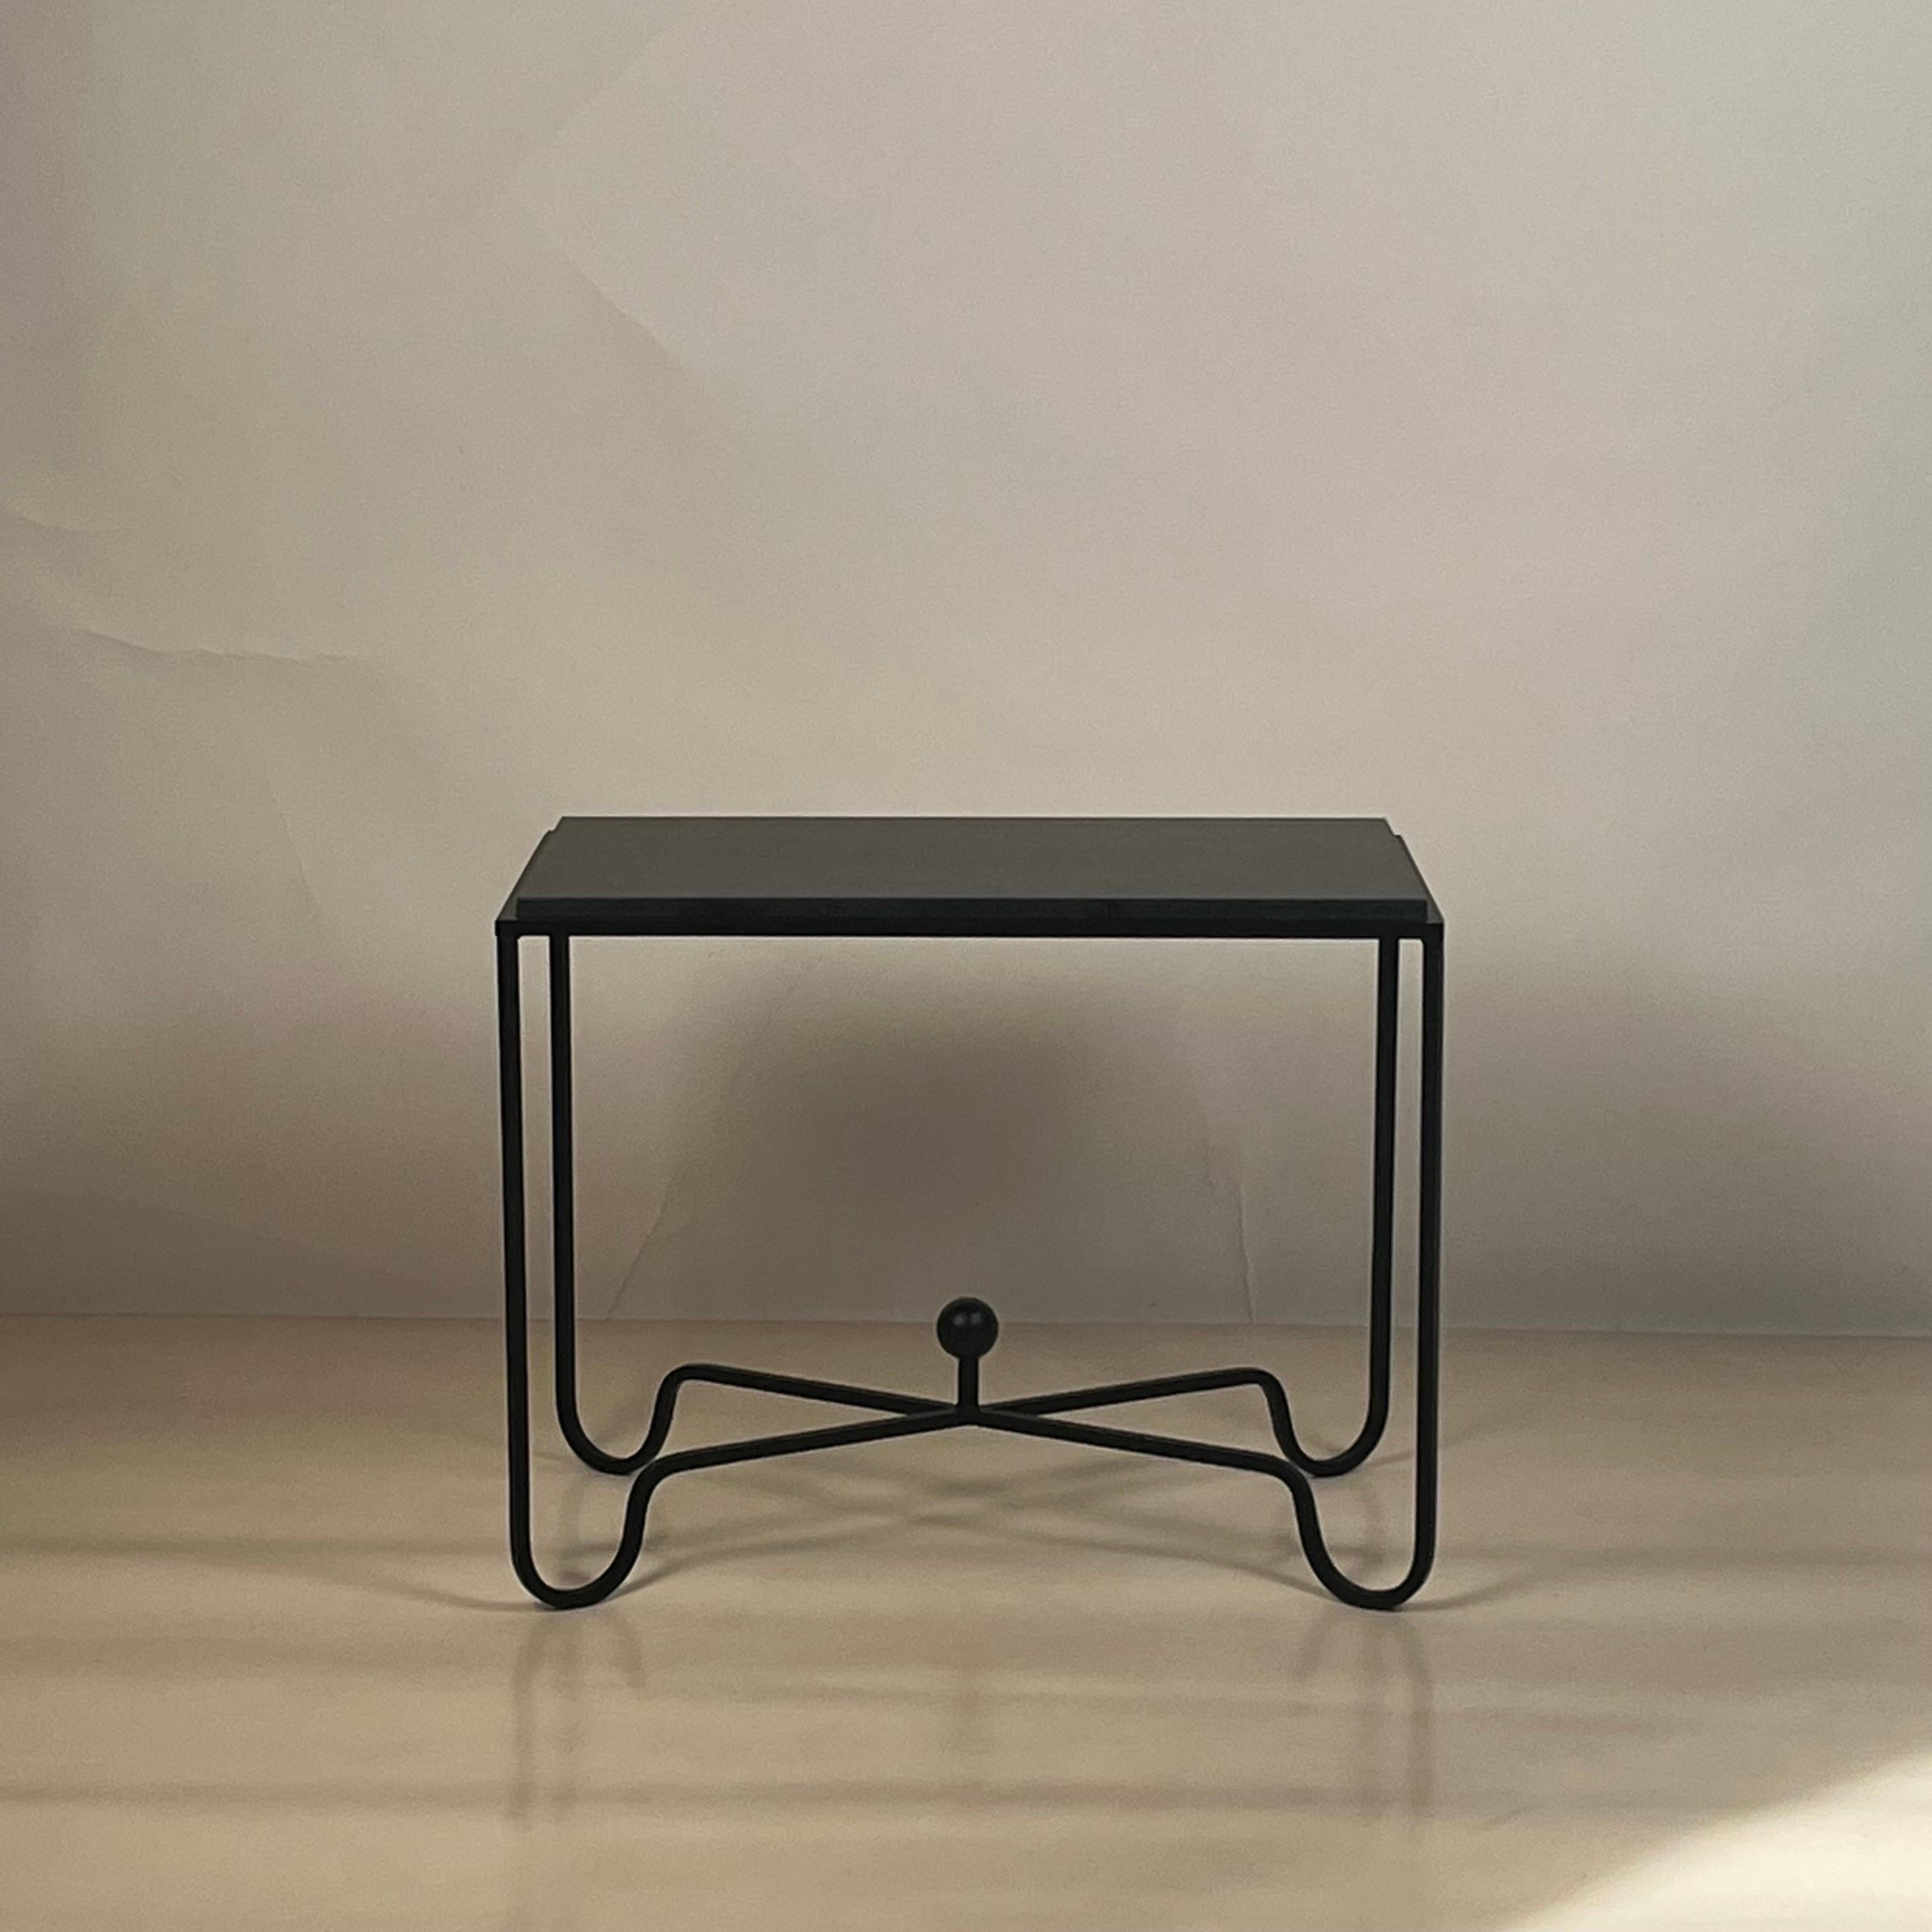 Pair of black limestone 'Entretoise' end tables by Design Frères.

Chic and understated.